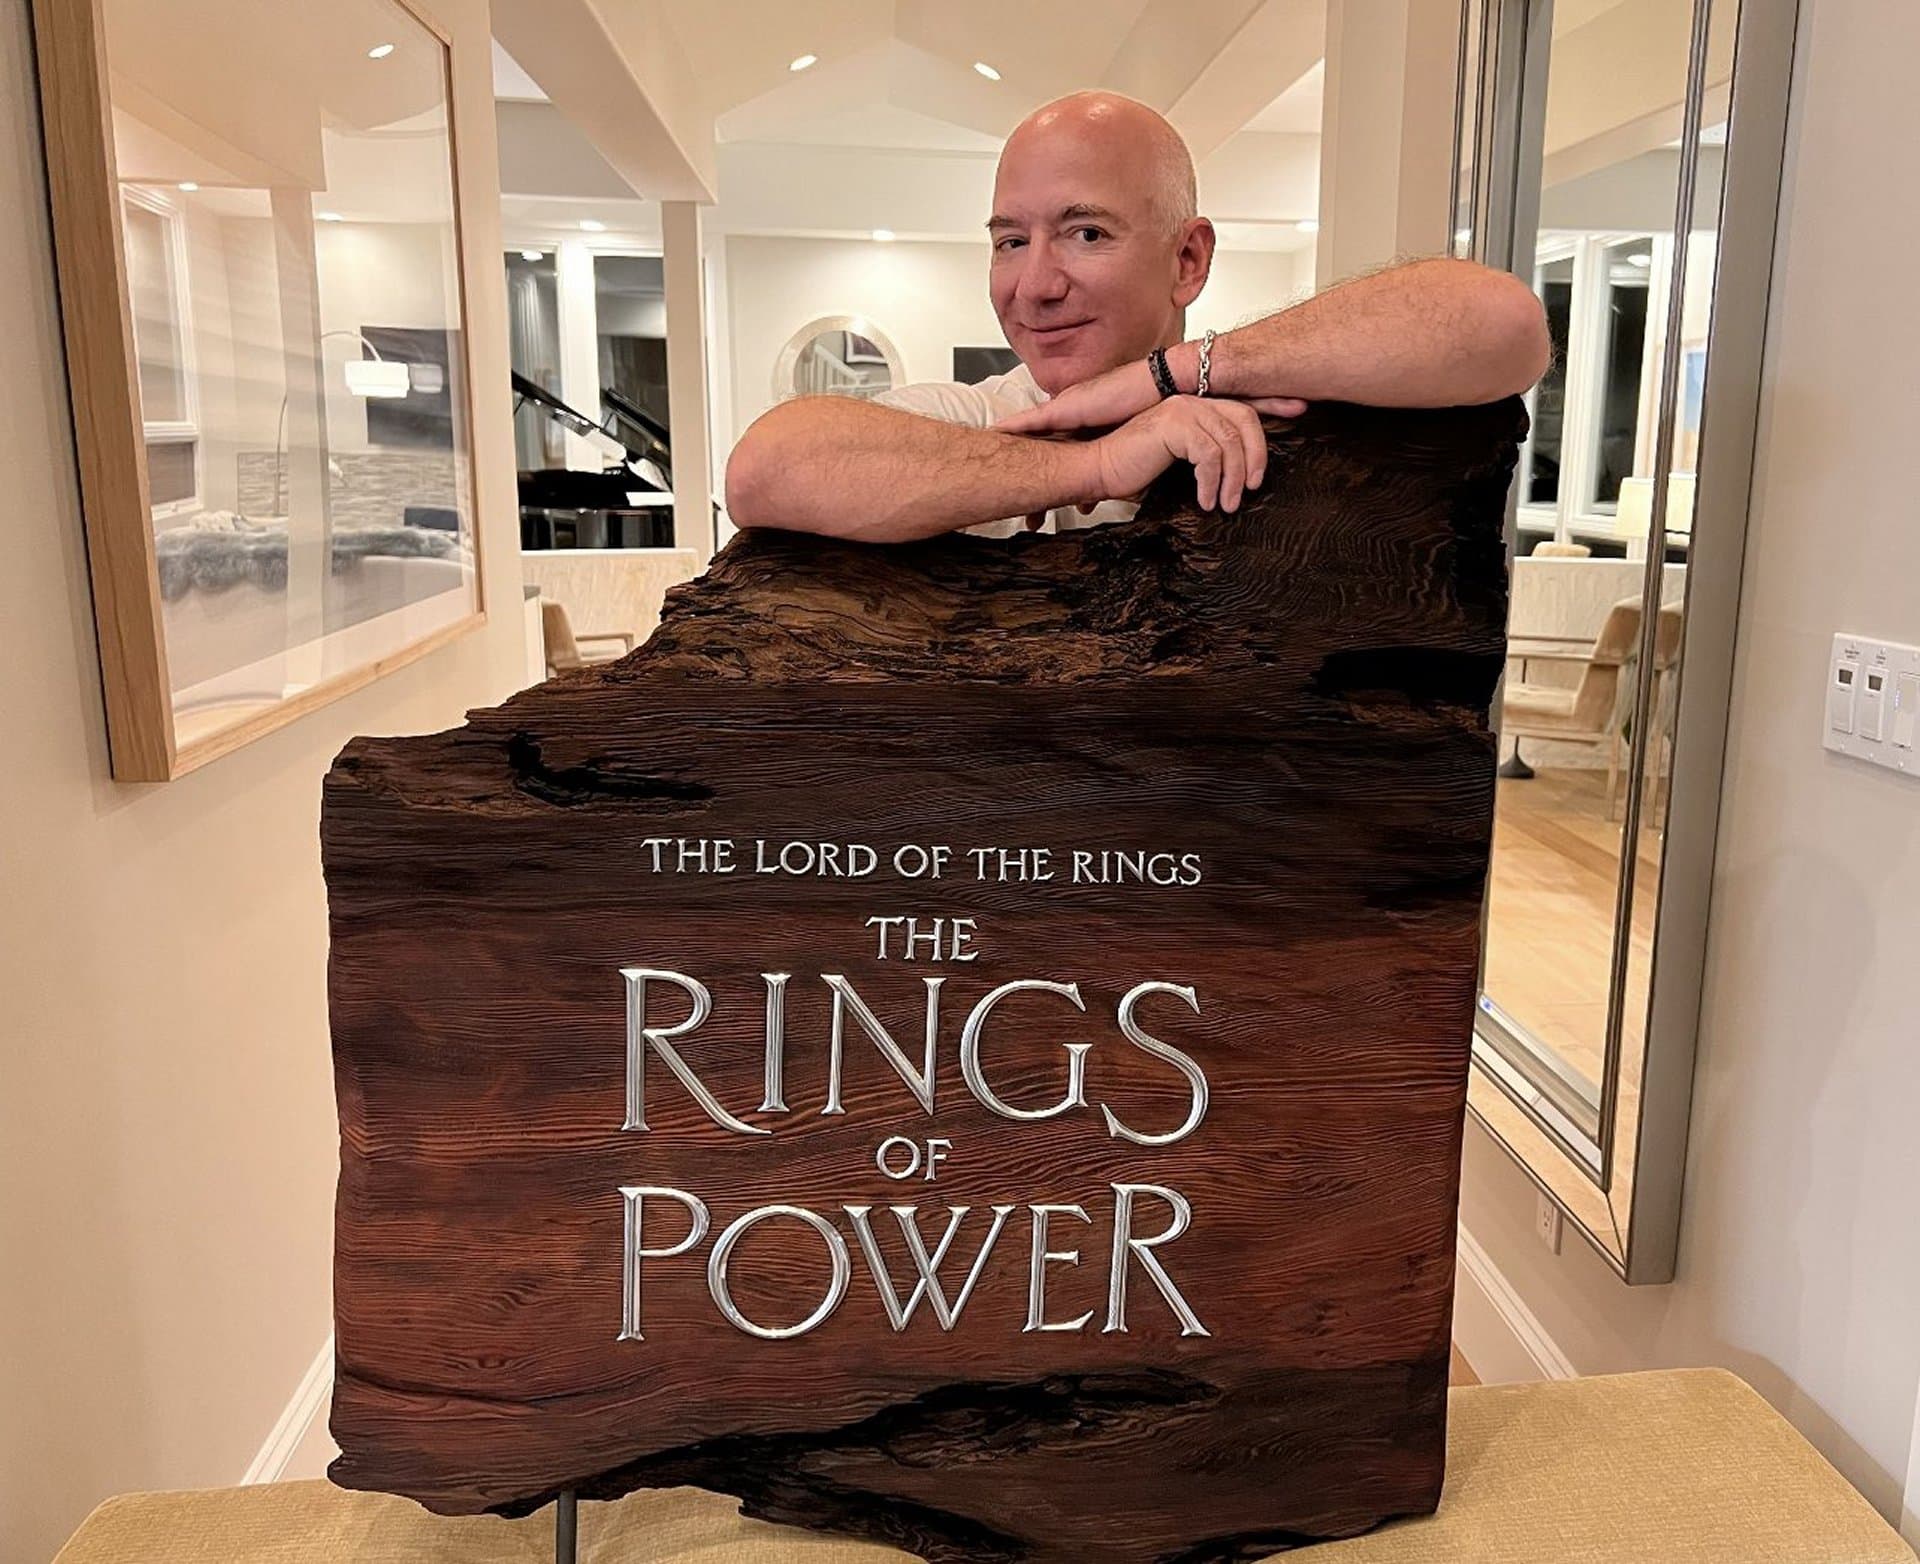 Jeff Bezos posing with The Lord Of The Rings logo